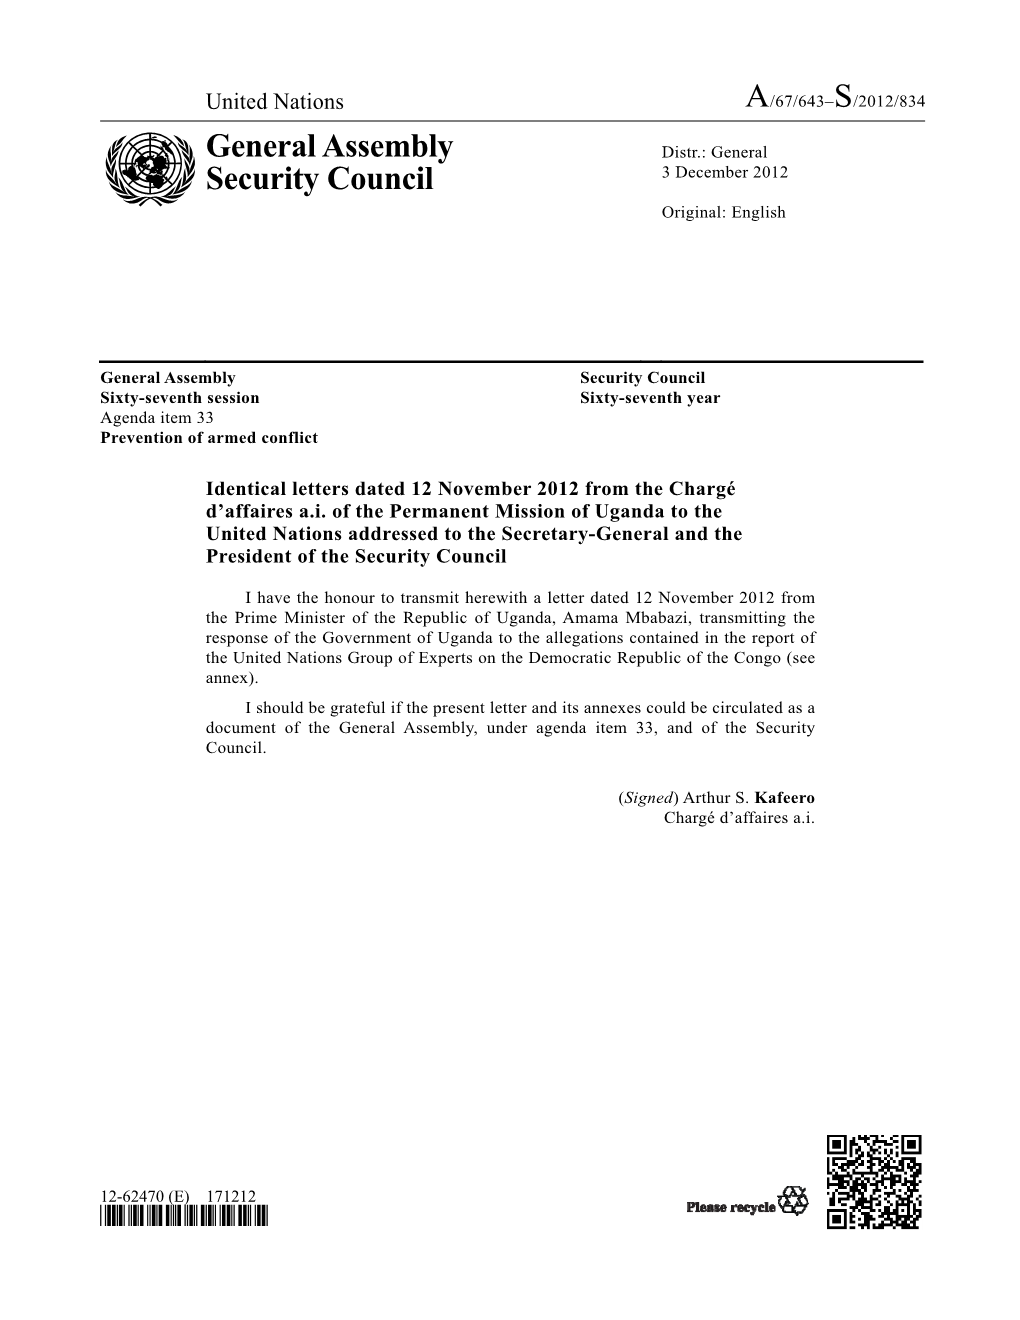 General Assembly Security Council Sixty-Seventh Session Sixty-Seventh Year Agenda Item 33 Prevention of Armed Conflict